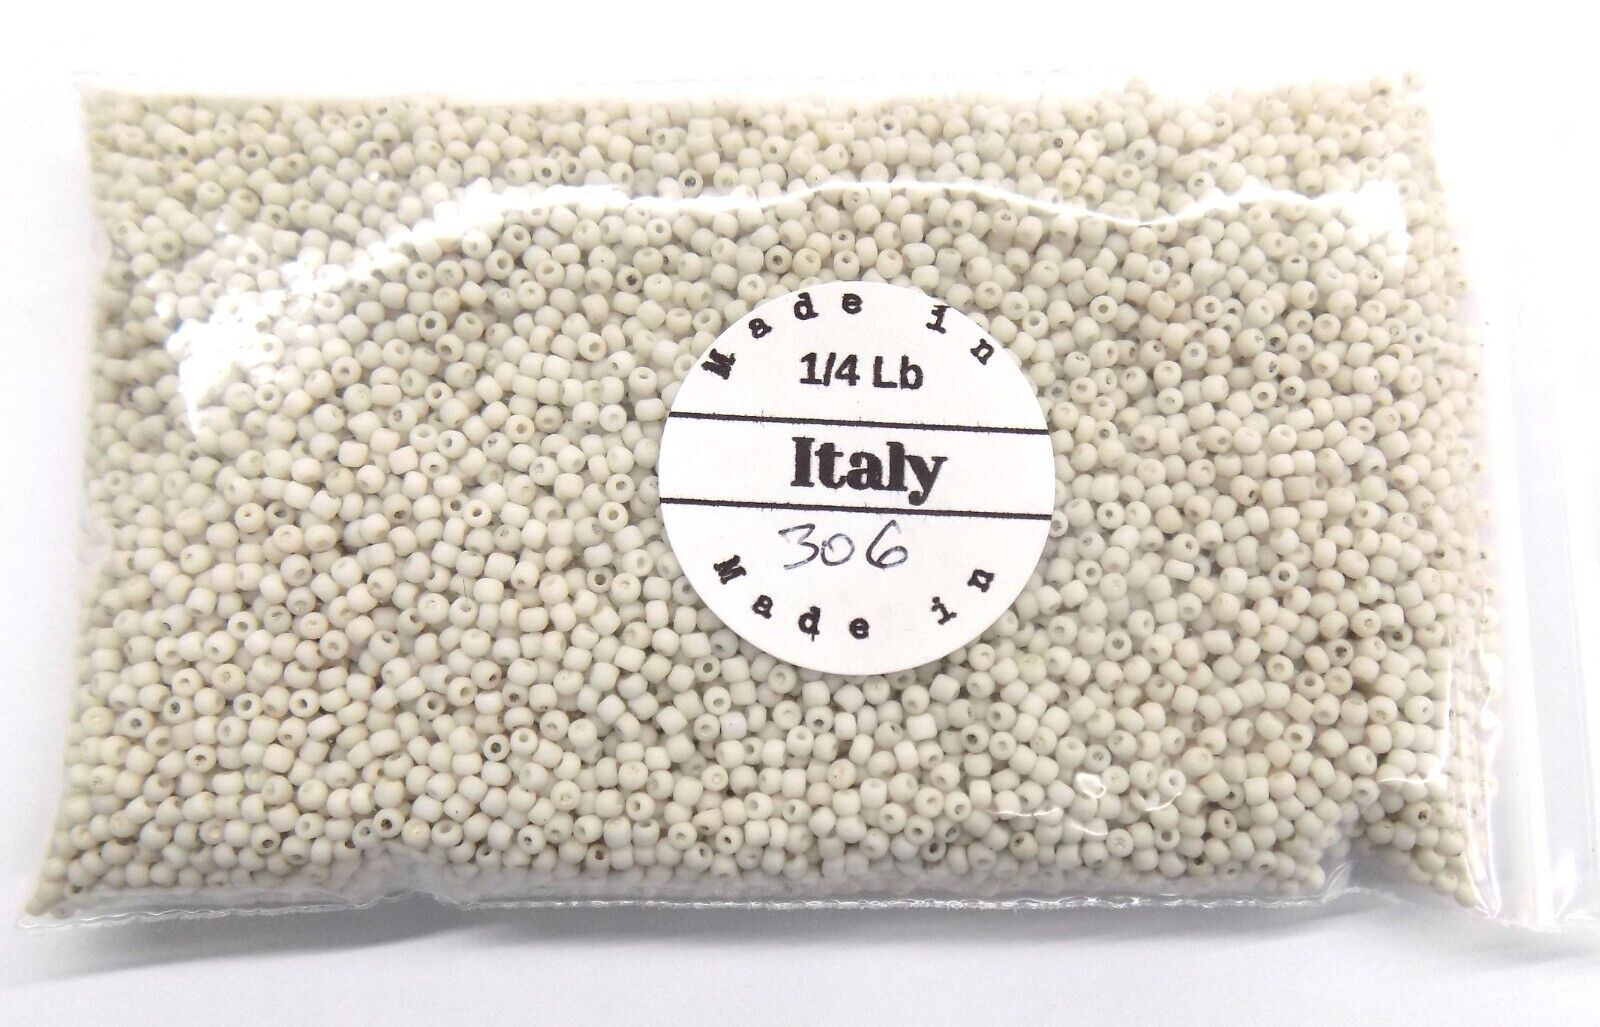 1/4# Pound 11/0 Original White Antique Venetian Seed Beads African Trade V 306